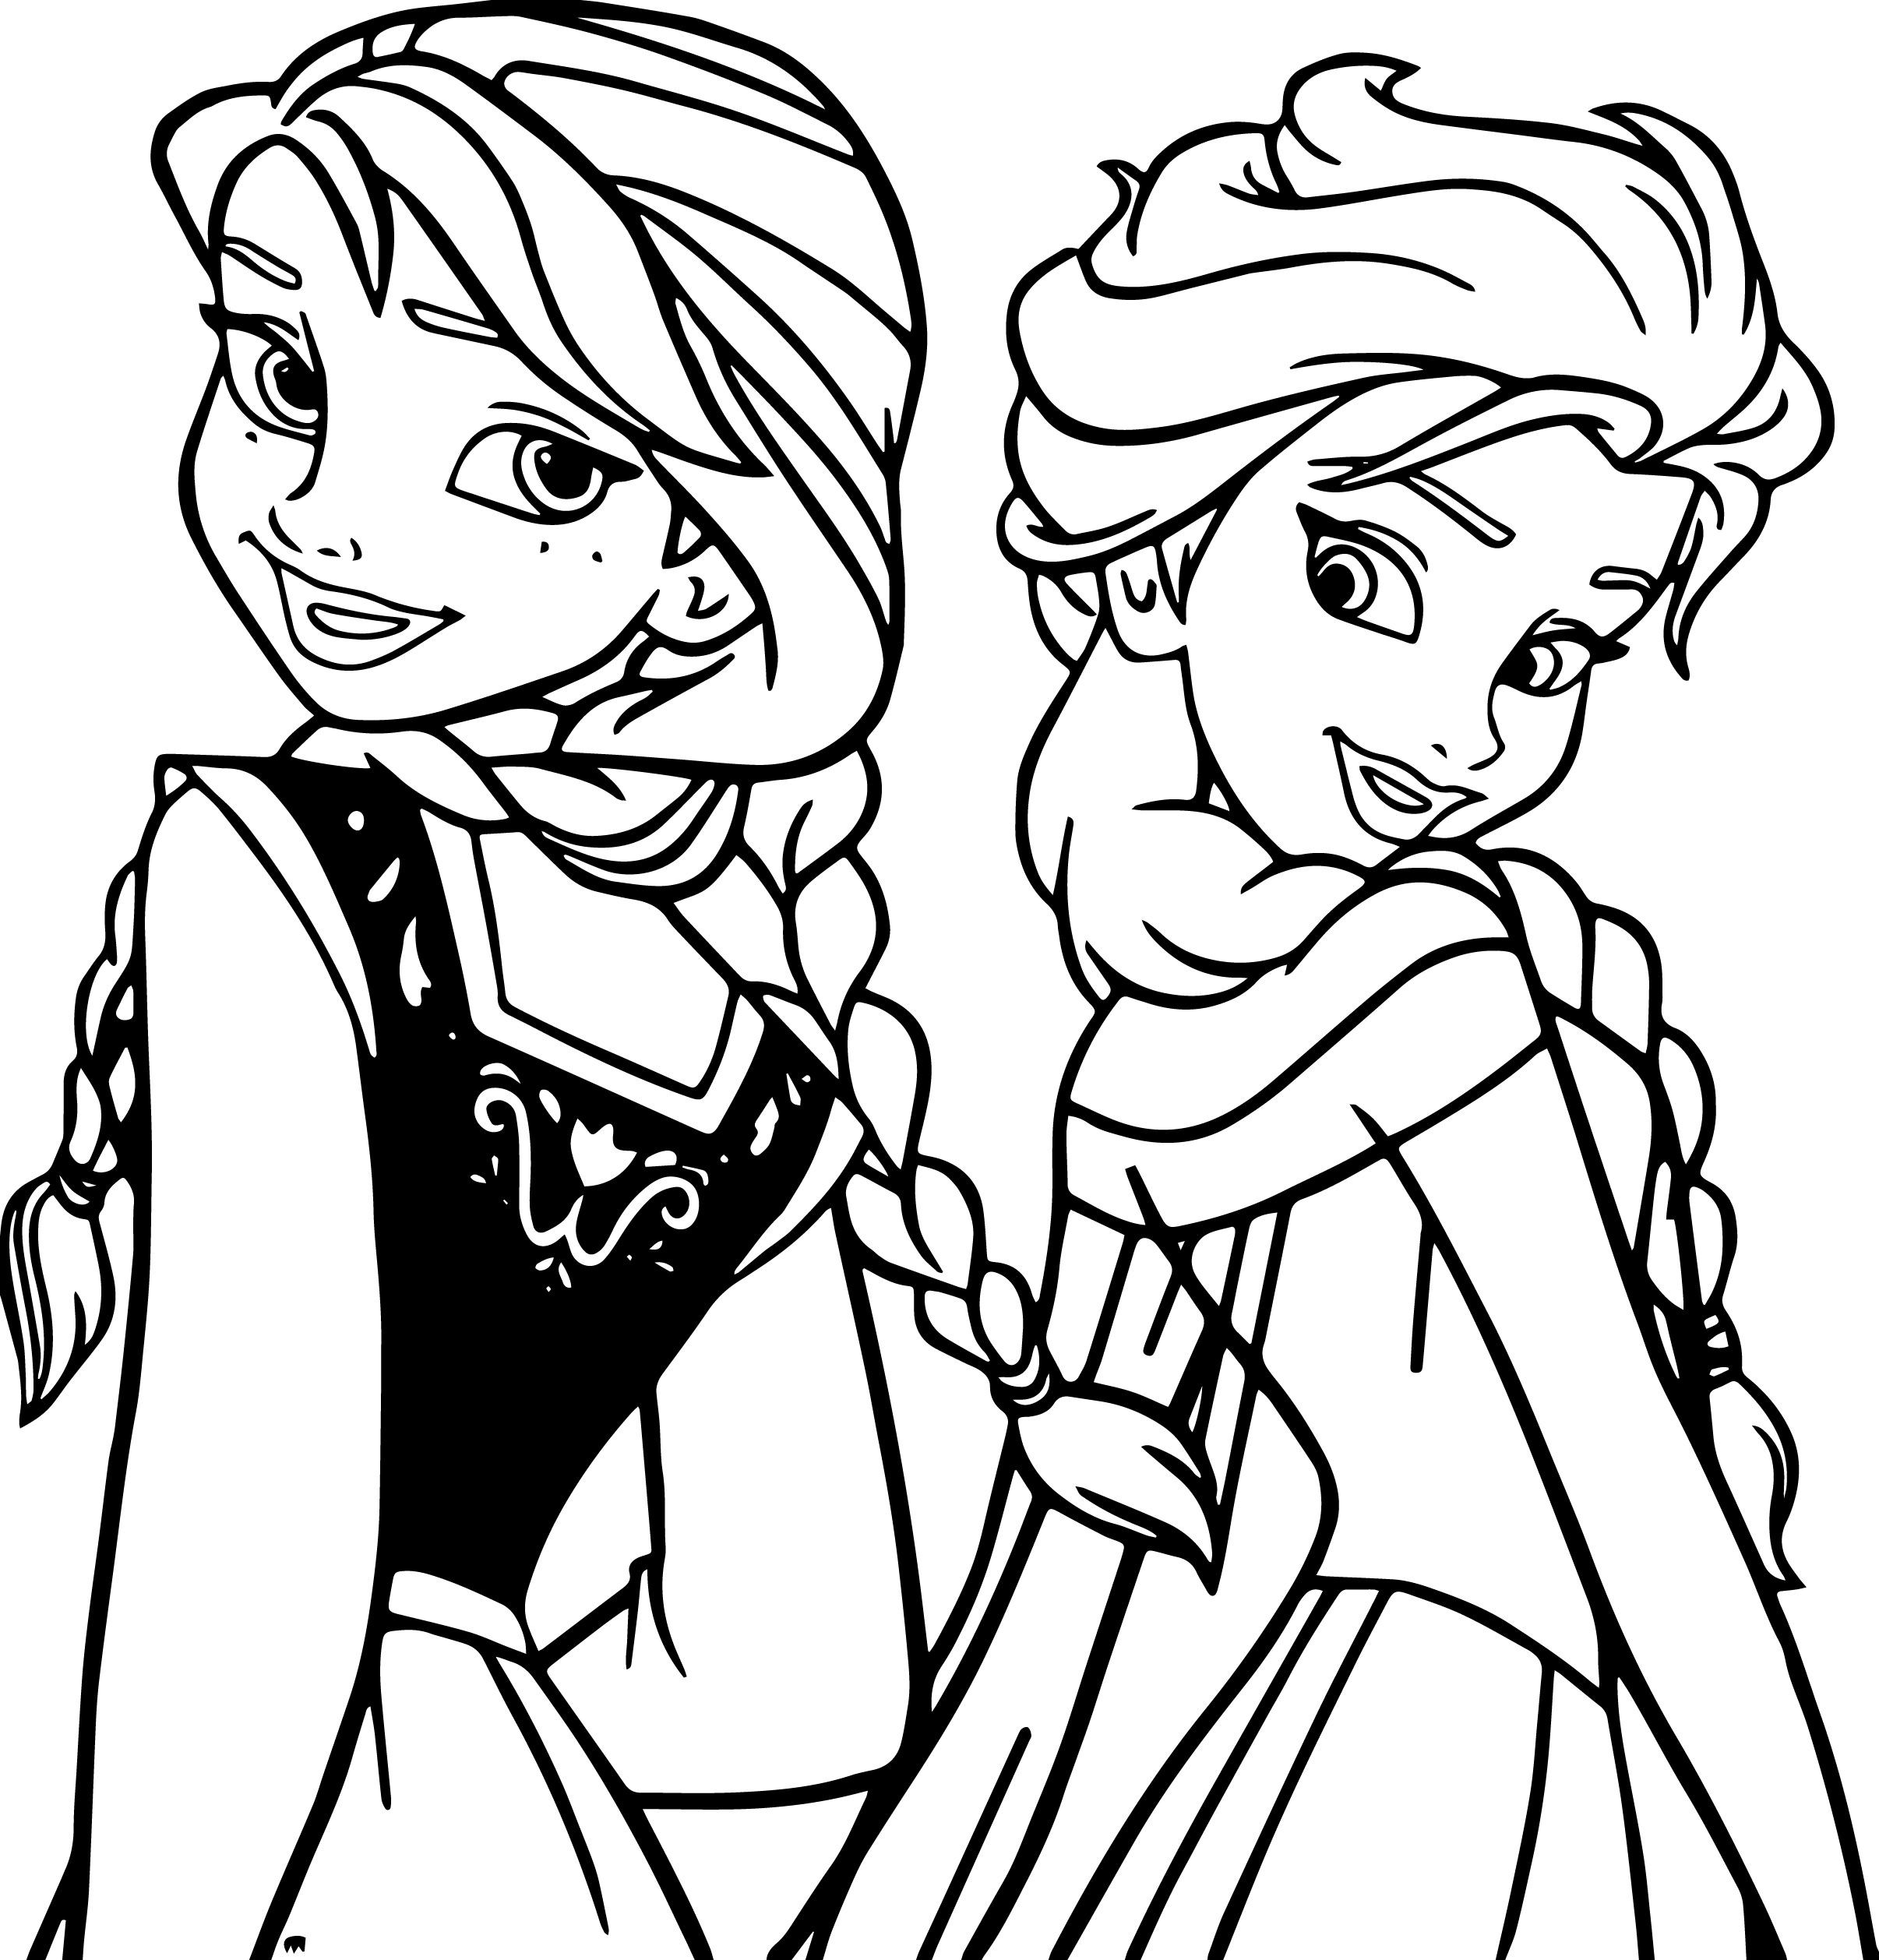 Cool Coloring Pages For Kids
 Coloring Pages Kids Coloring Pages Cool Free Color Pages